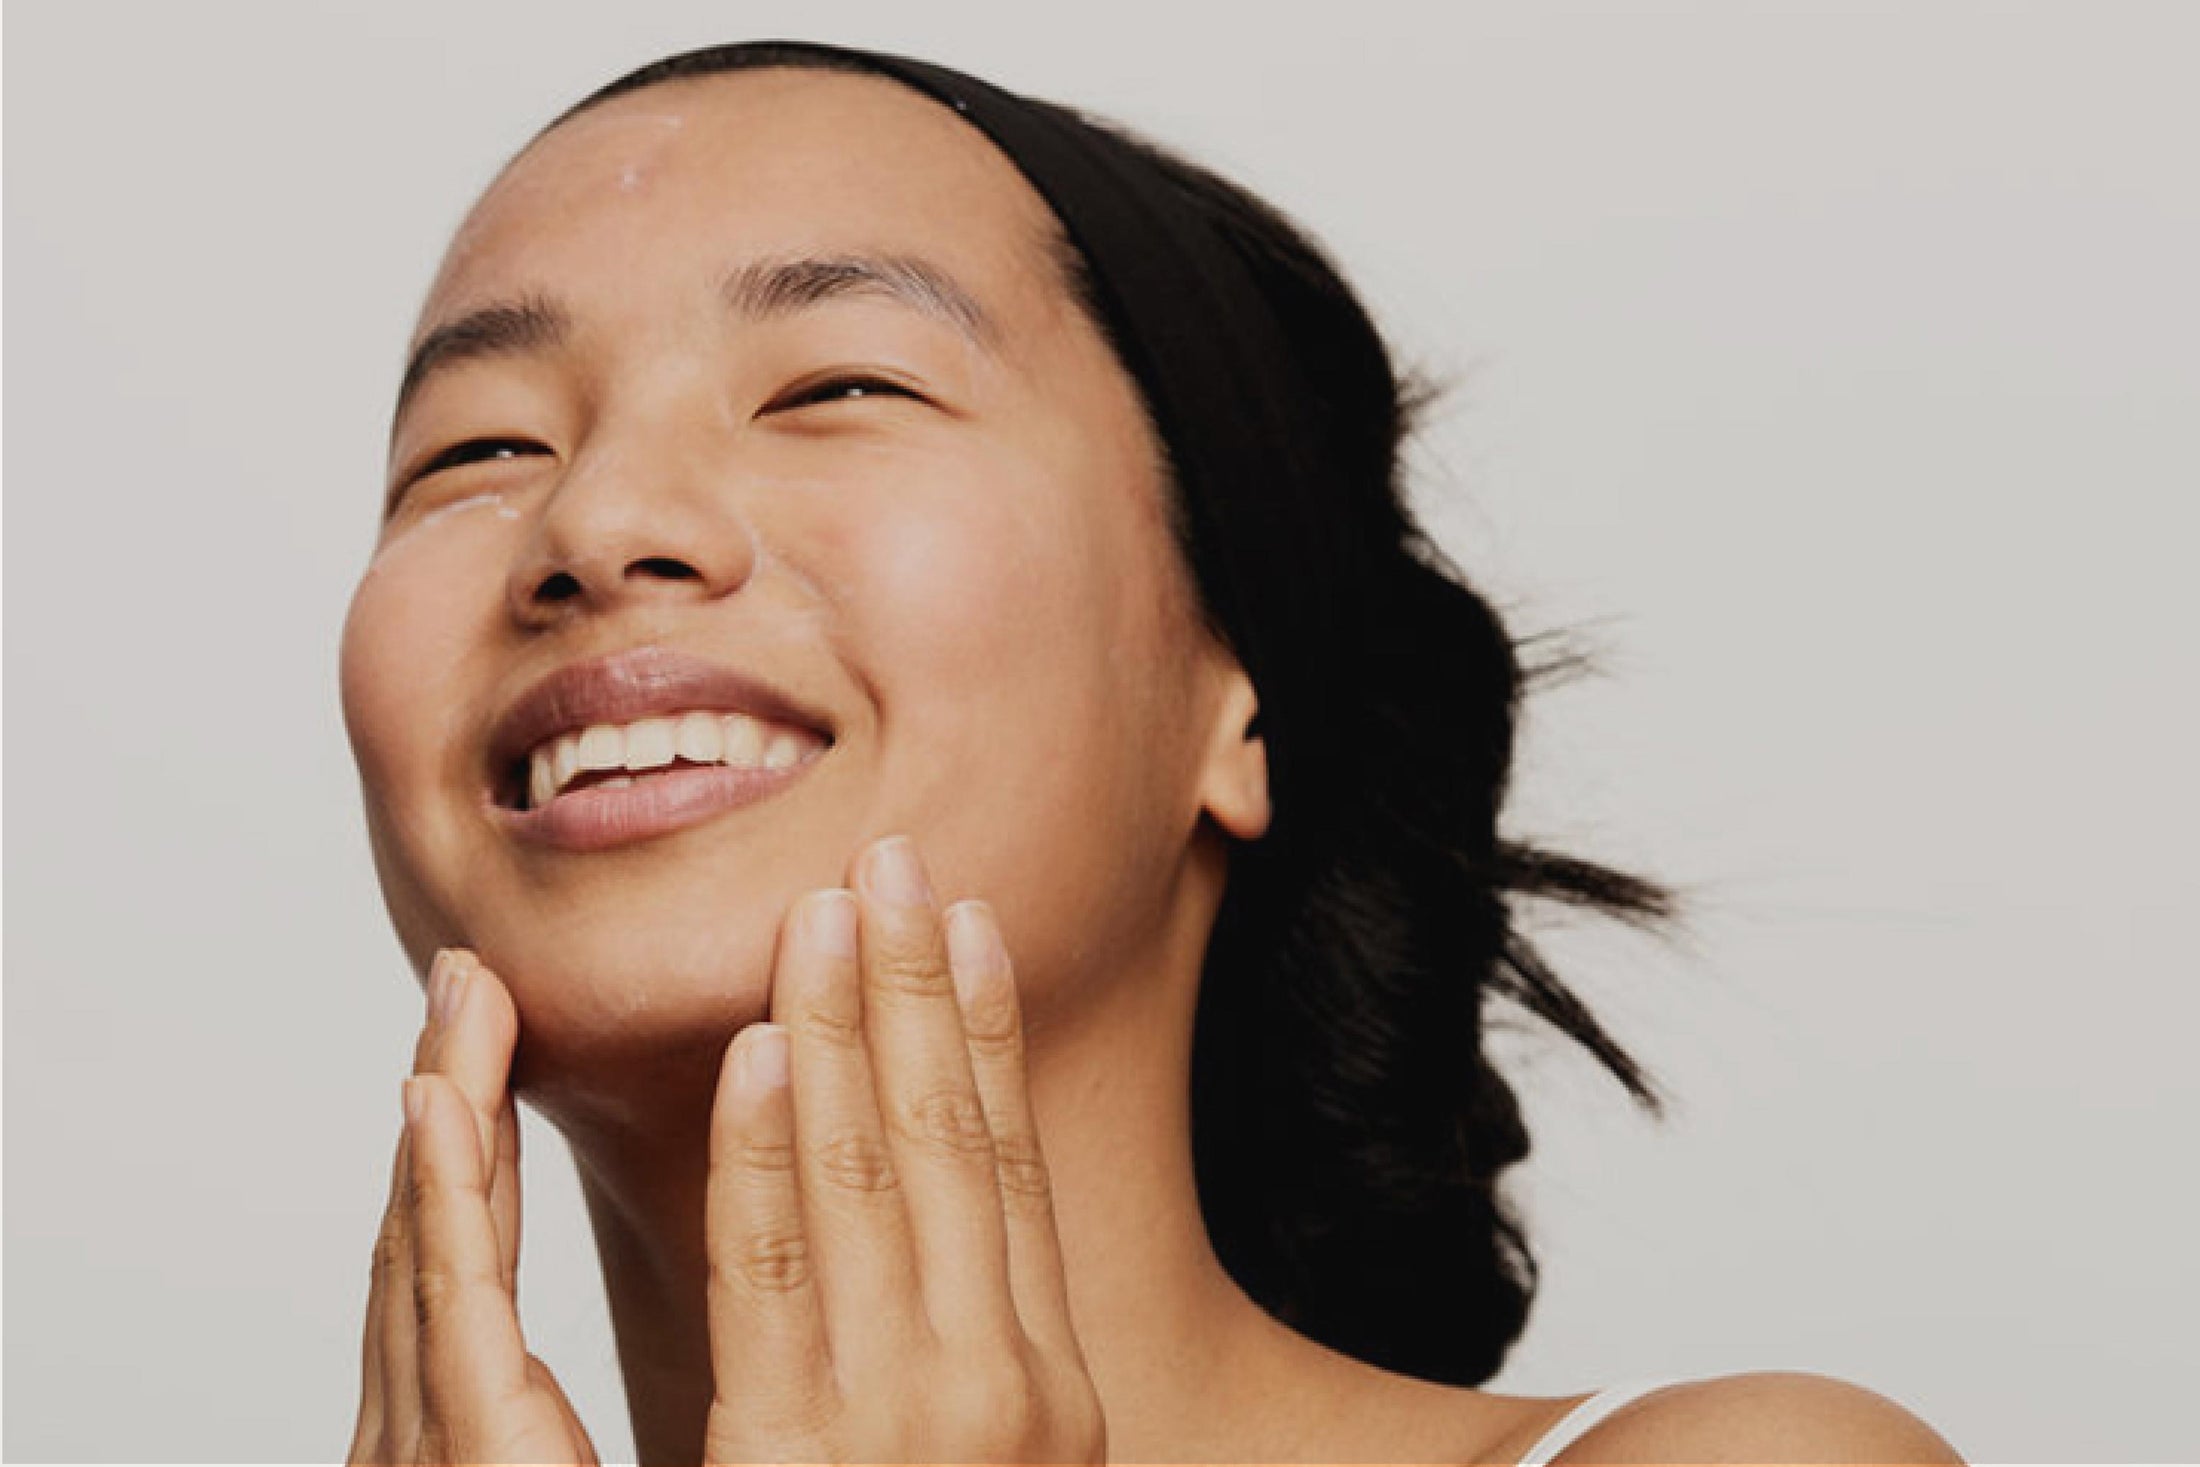 5 STEPS TO GET RID OF UNEVEN SKIN TEXTURE